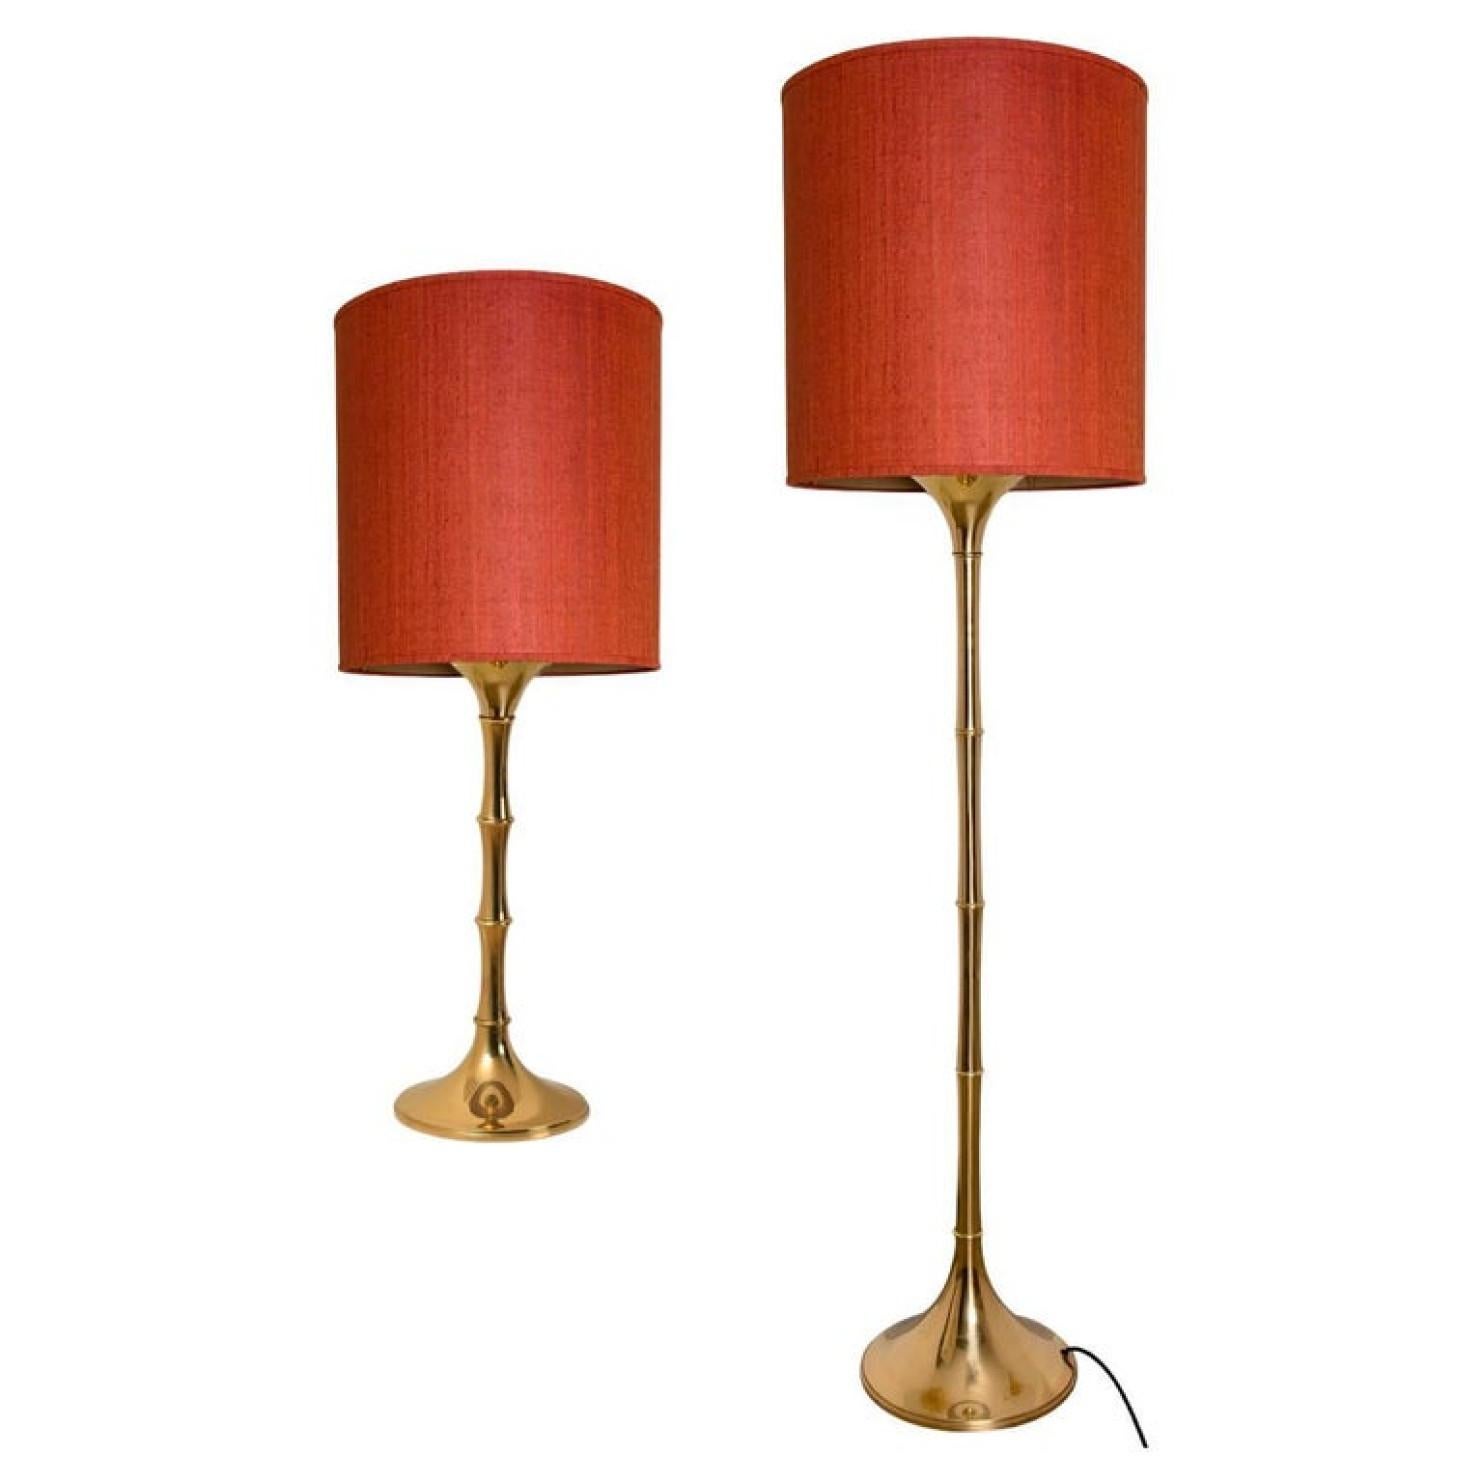 Elegant brass bamboo table and floor lamps Model designed by Ingo Maurer, 1968 for Design M Munich, Germany.
With new gold metal custom made chinenes red silk lamp shades with Bronze inner shade. Made by Rene Houben.

Good original vintage